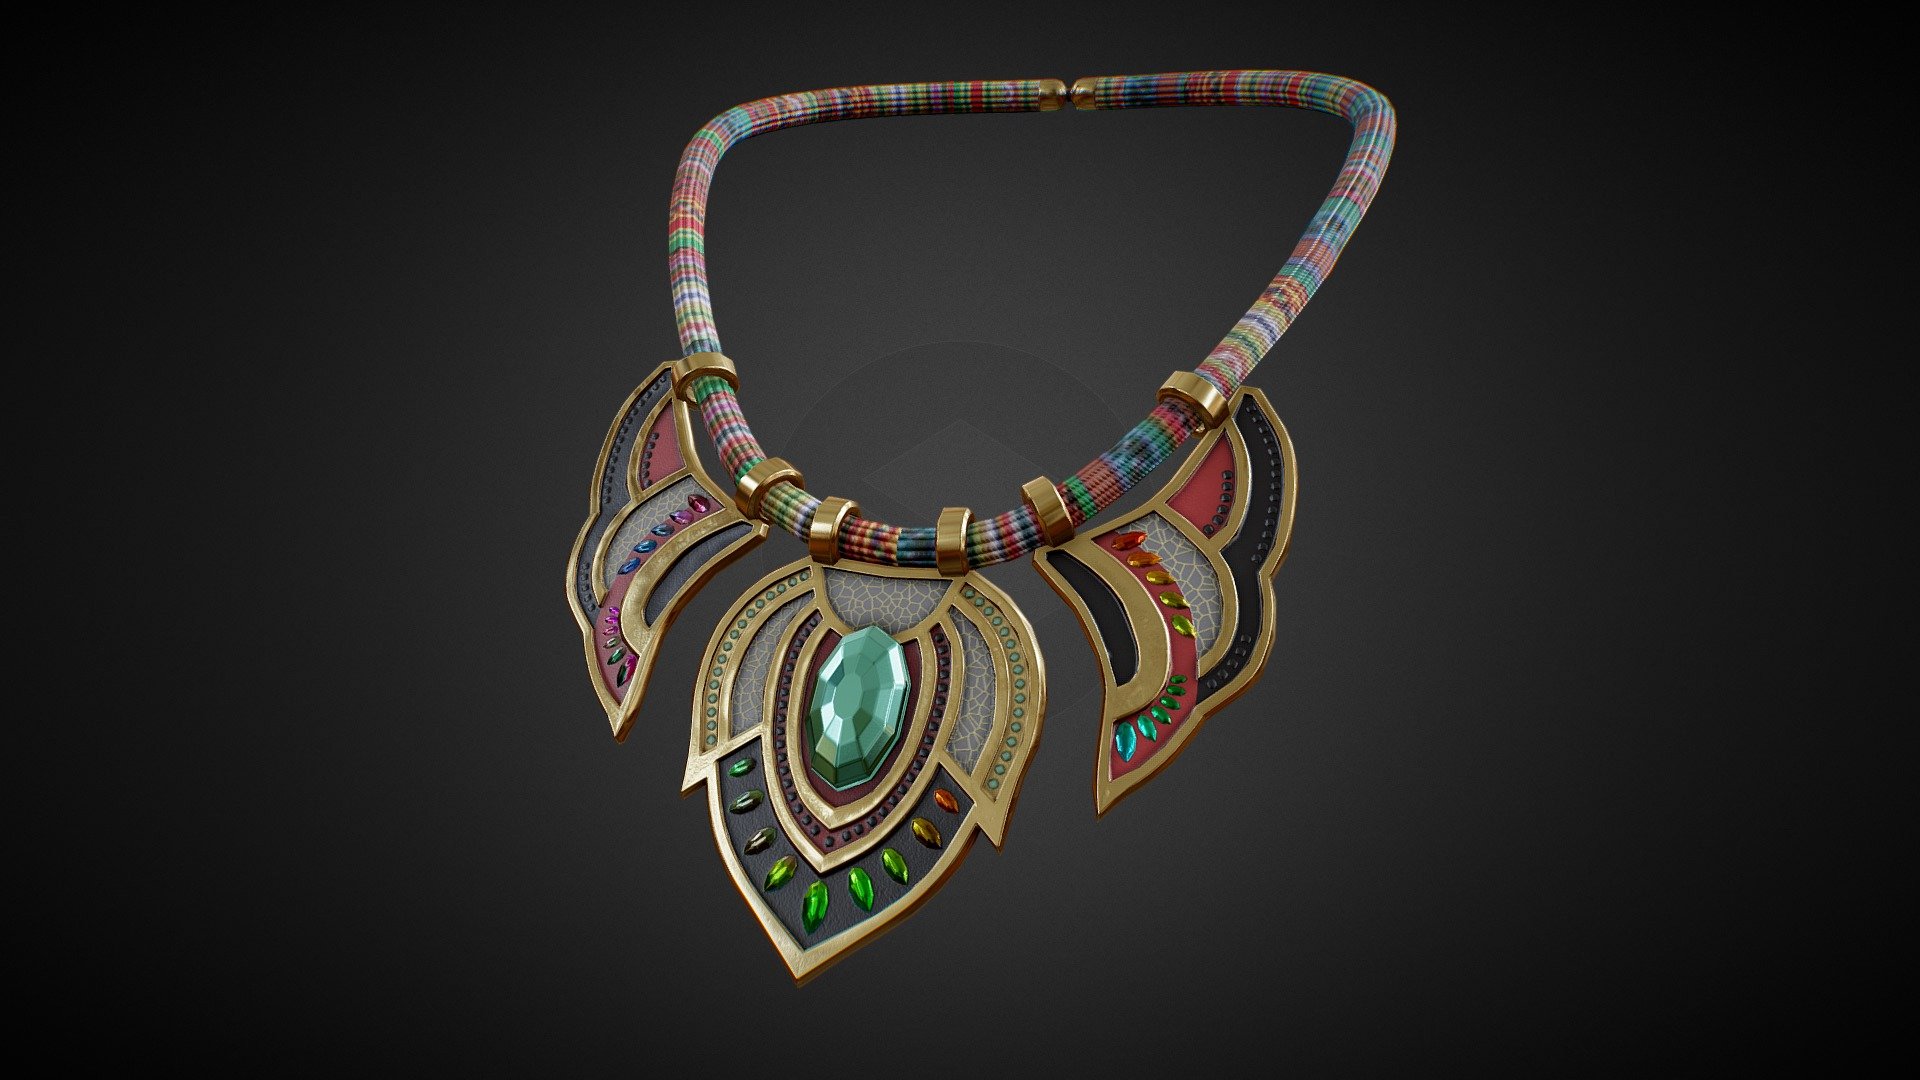 https://www.artstation.com/artwork/RnGAqO
This item was designed for a character in one of EG's upcoming projects 3d model